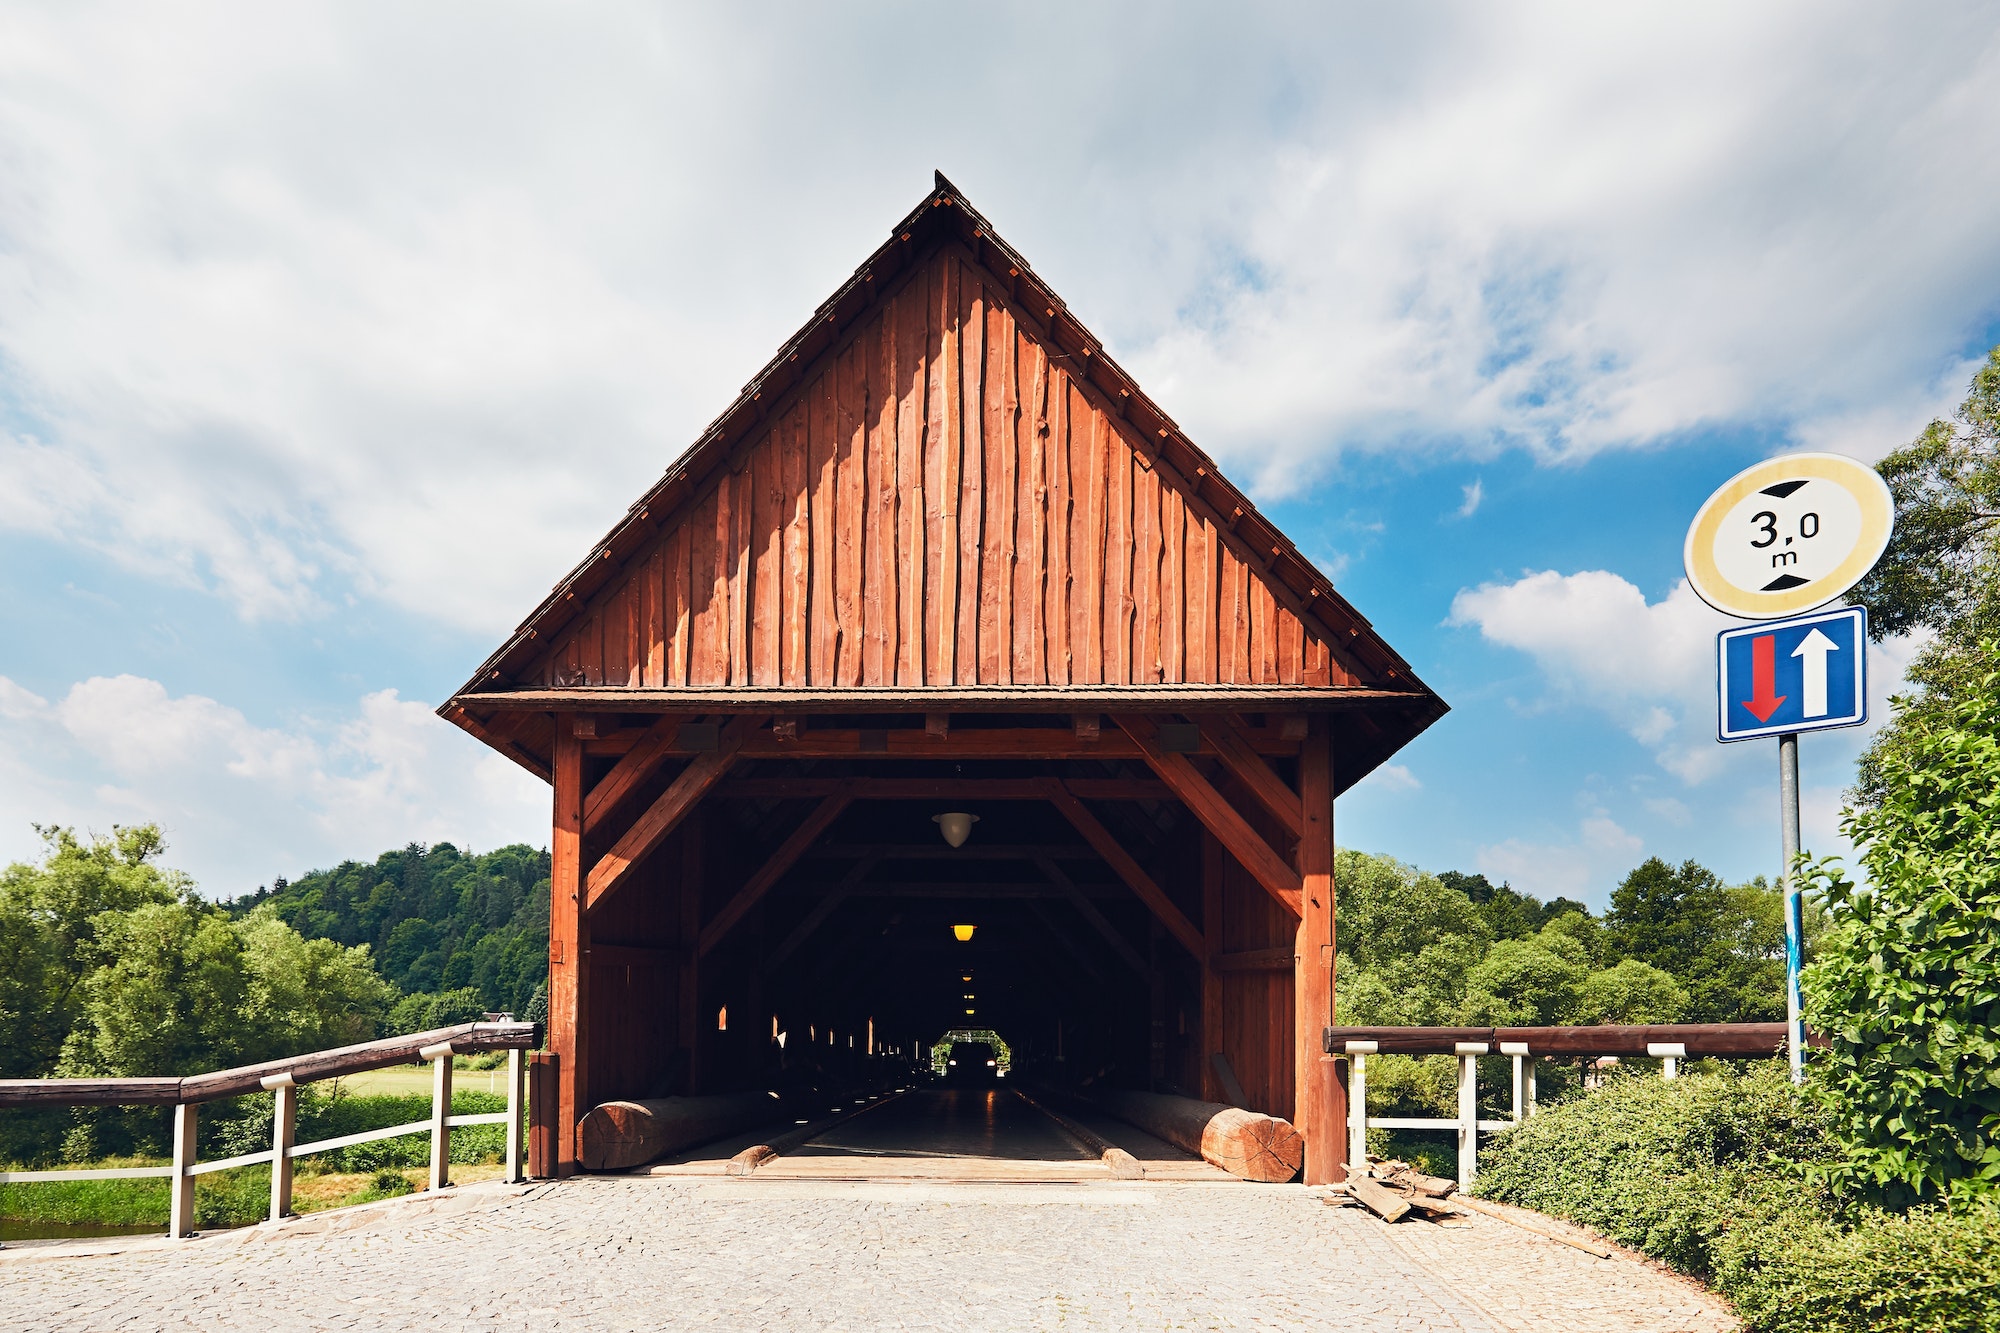 Covered bridge over the river